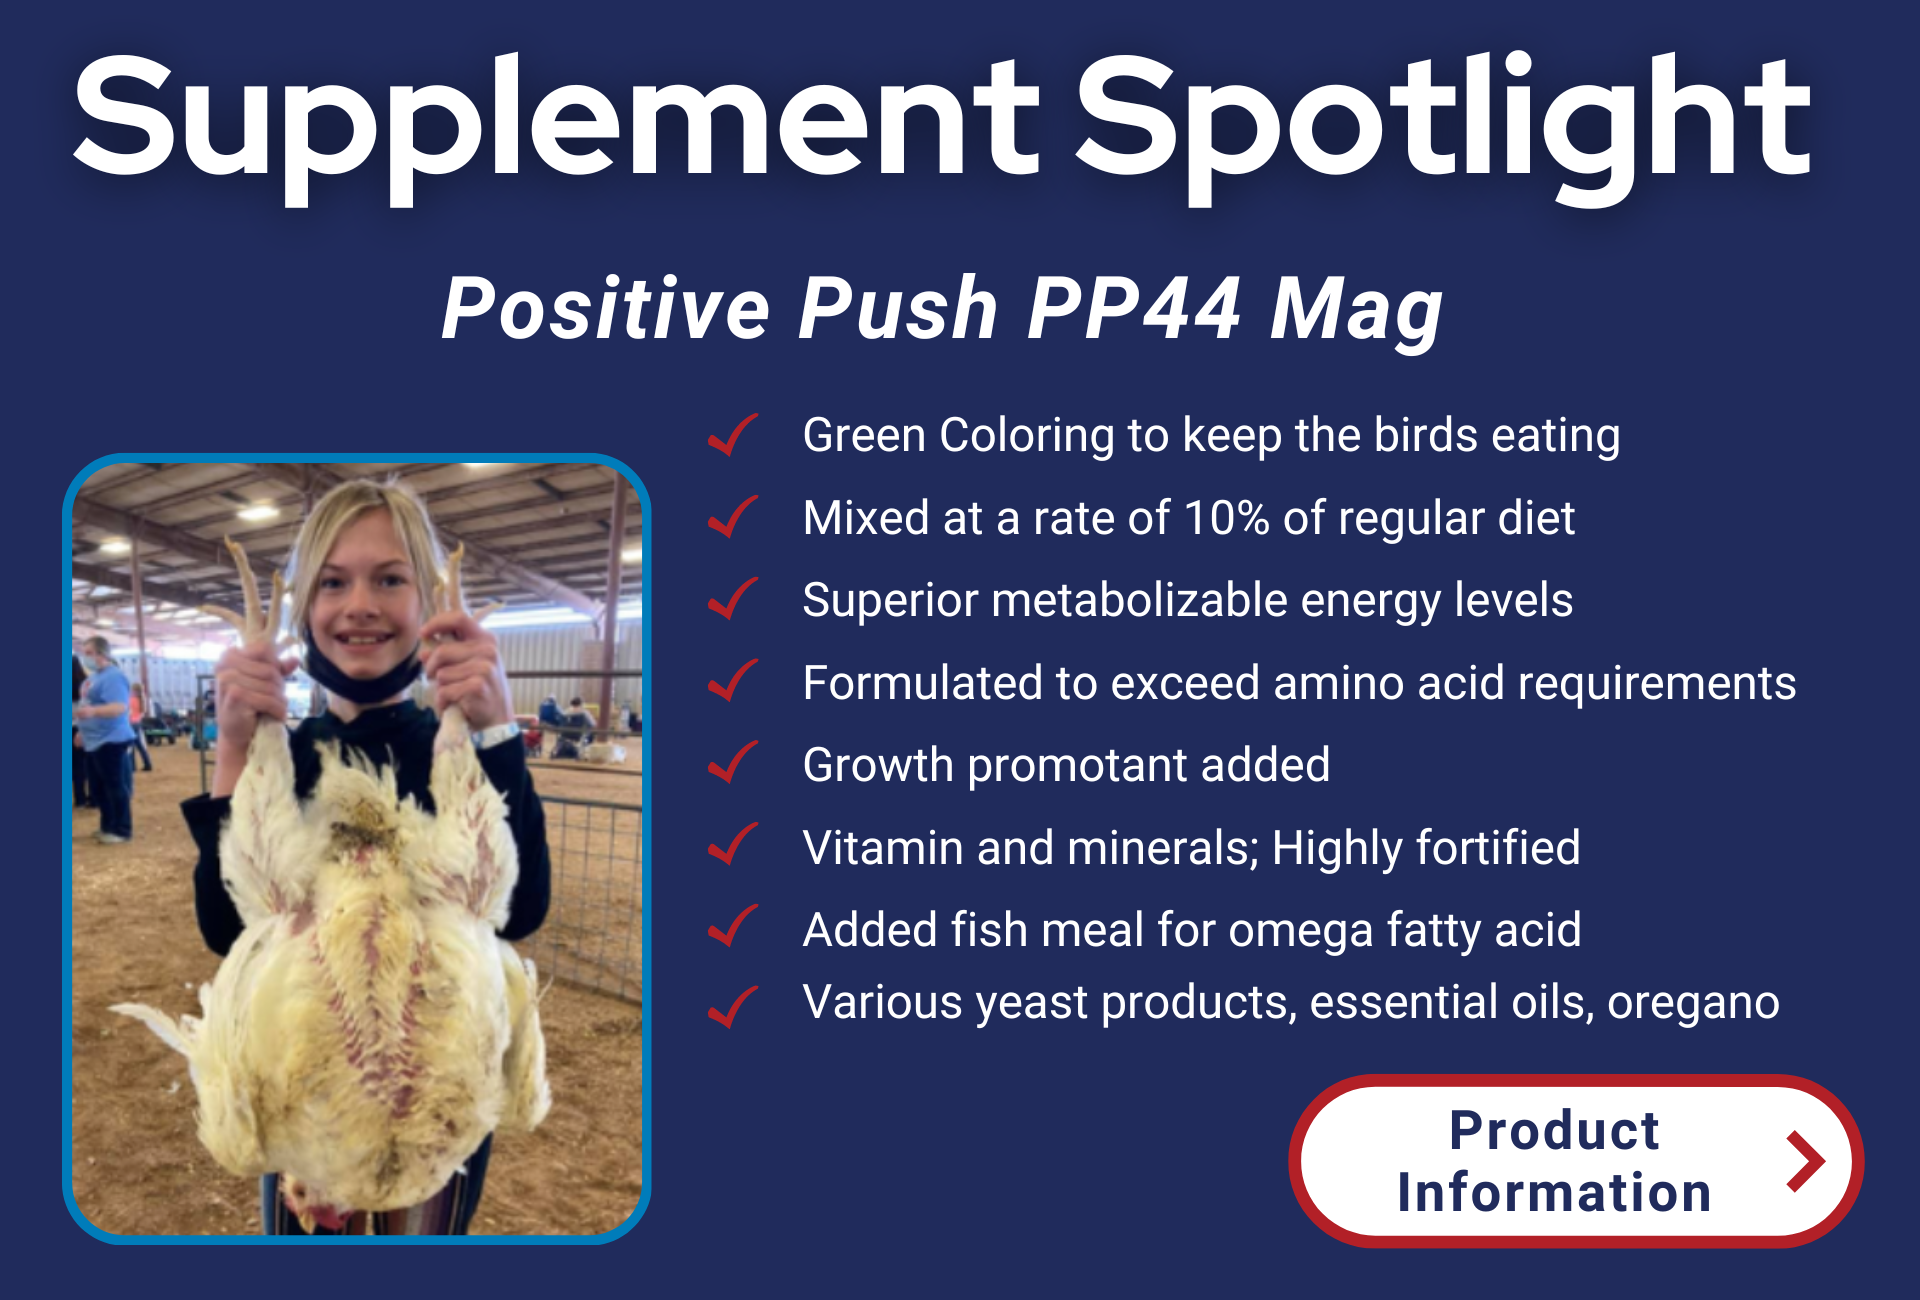 Features of the Positive Push PP44 Mag supplement